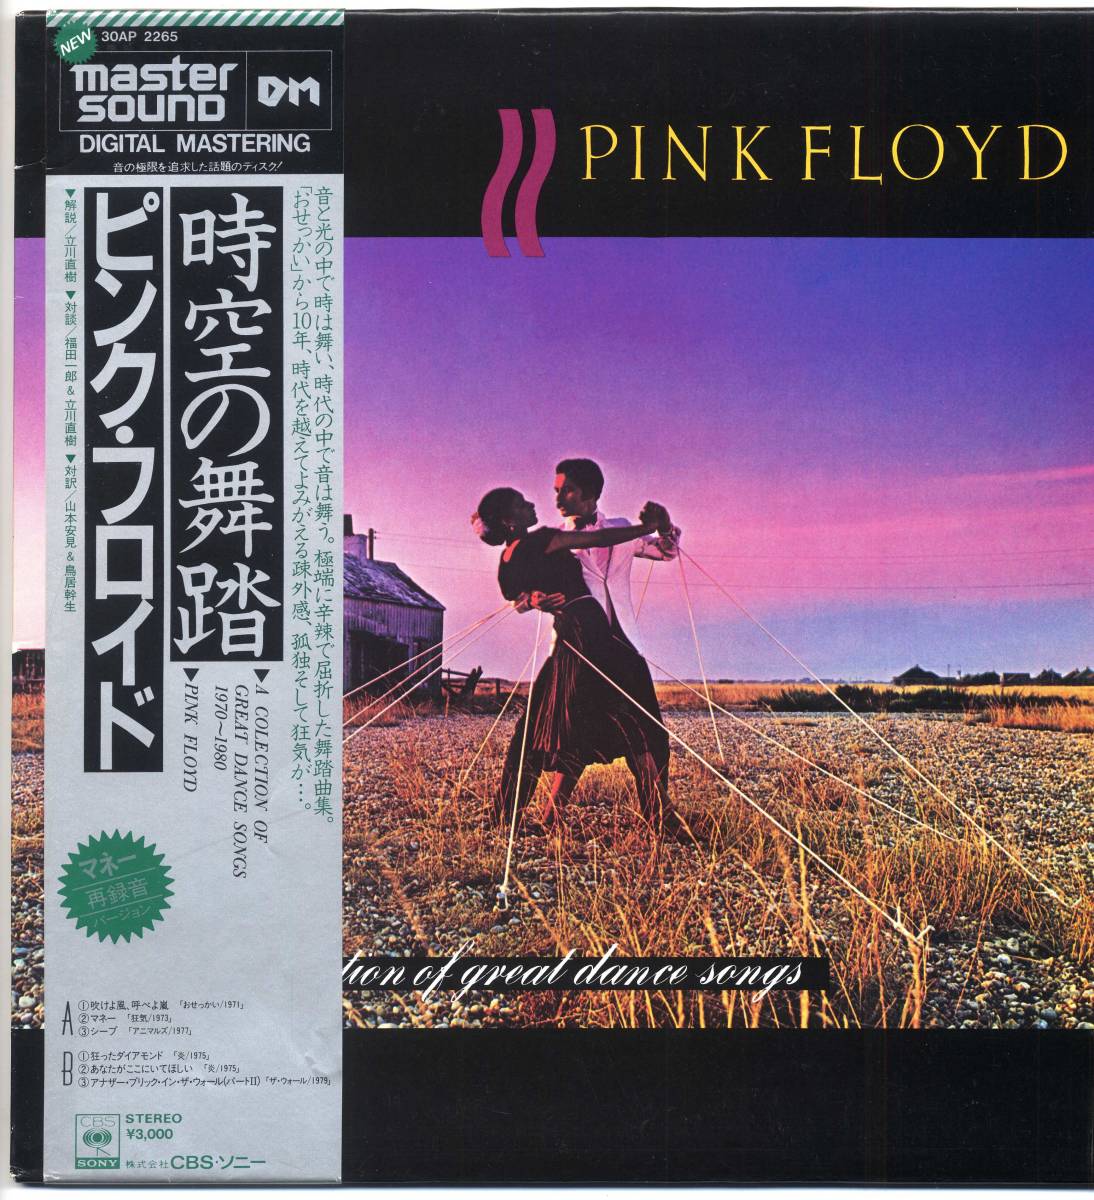 LP*PINK FLOYD/ space-time. dance ( with belt,master sound/CBS/SONY,30AP2265,Y3,000,\'81)* pink * floyd /A COLLECTION OF GREAT DANCE SONGS/OBI